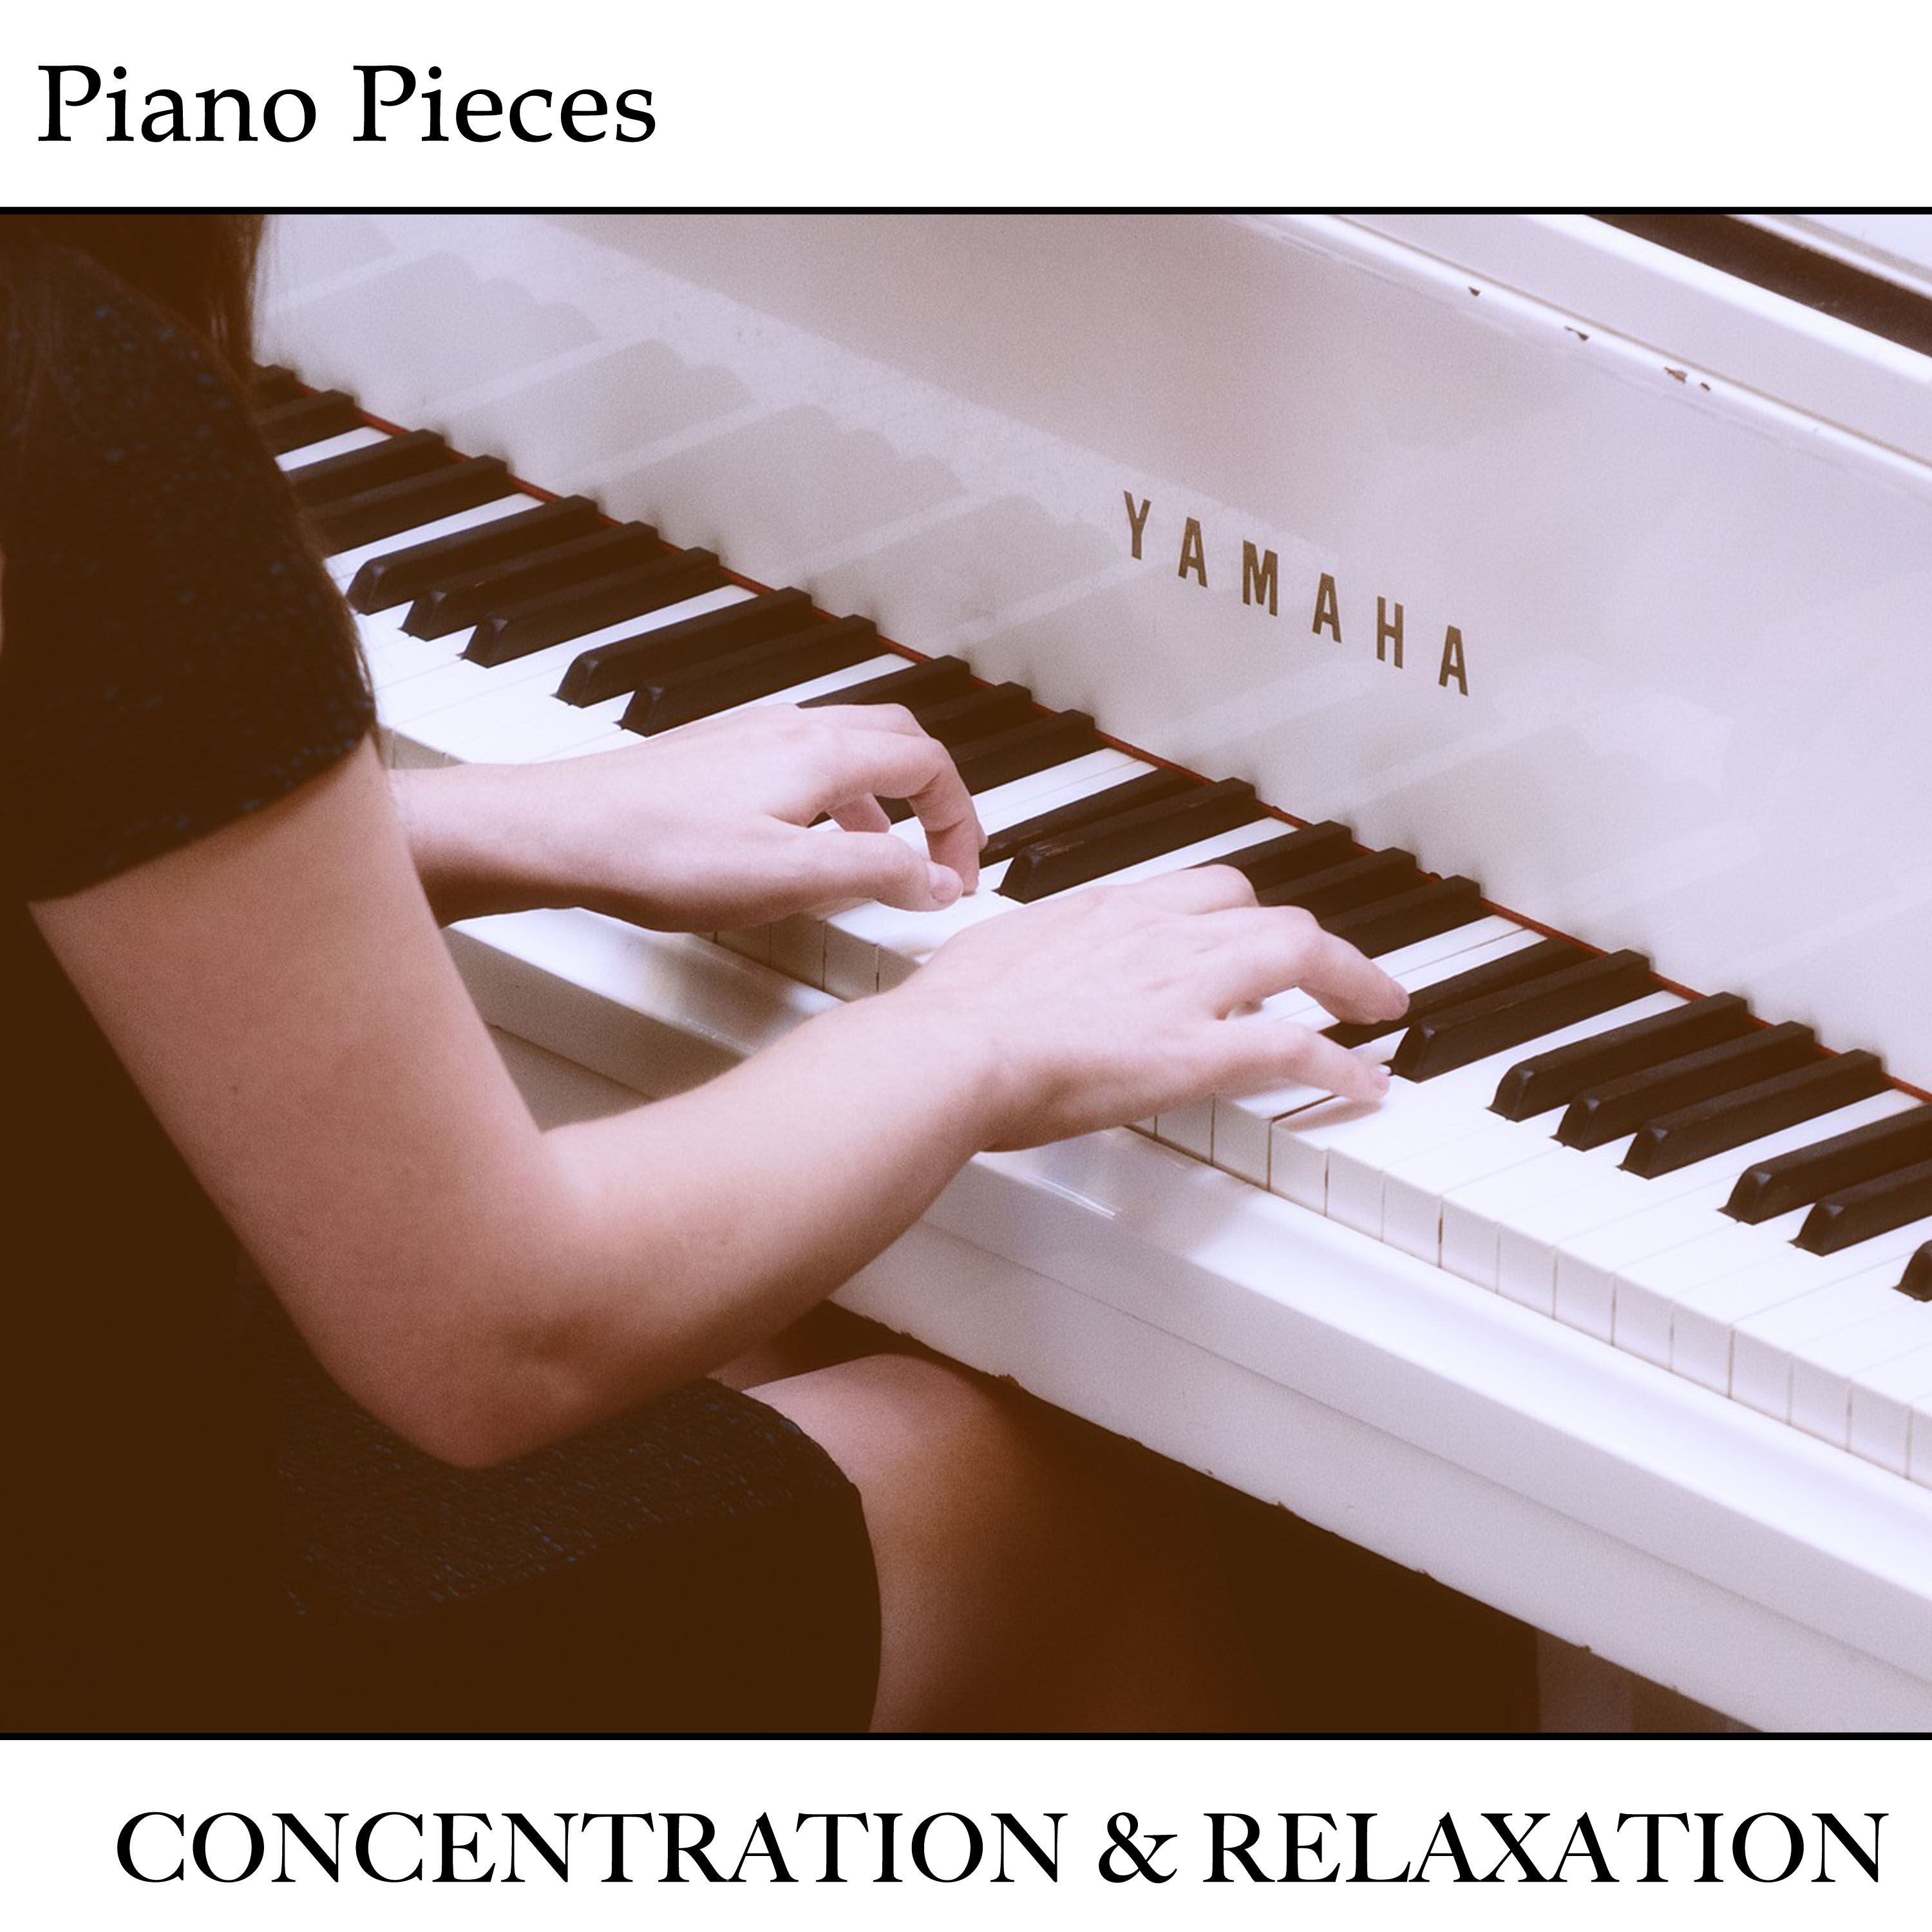 14 Piano Pieces for Concentration and Relaxation